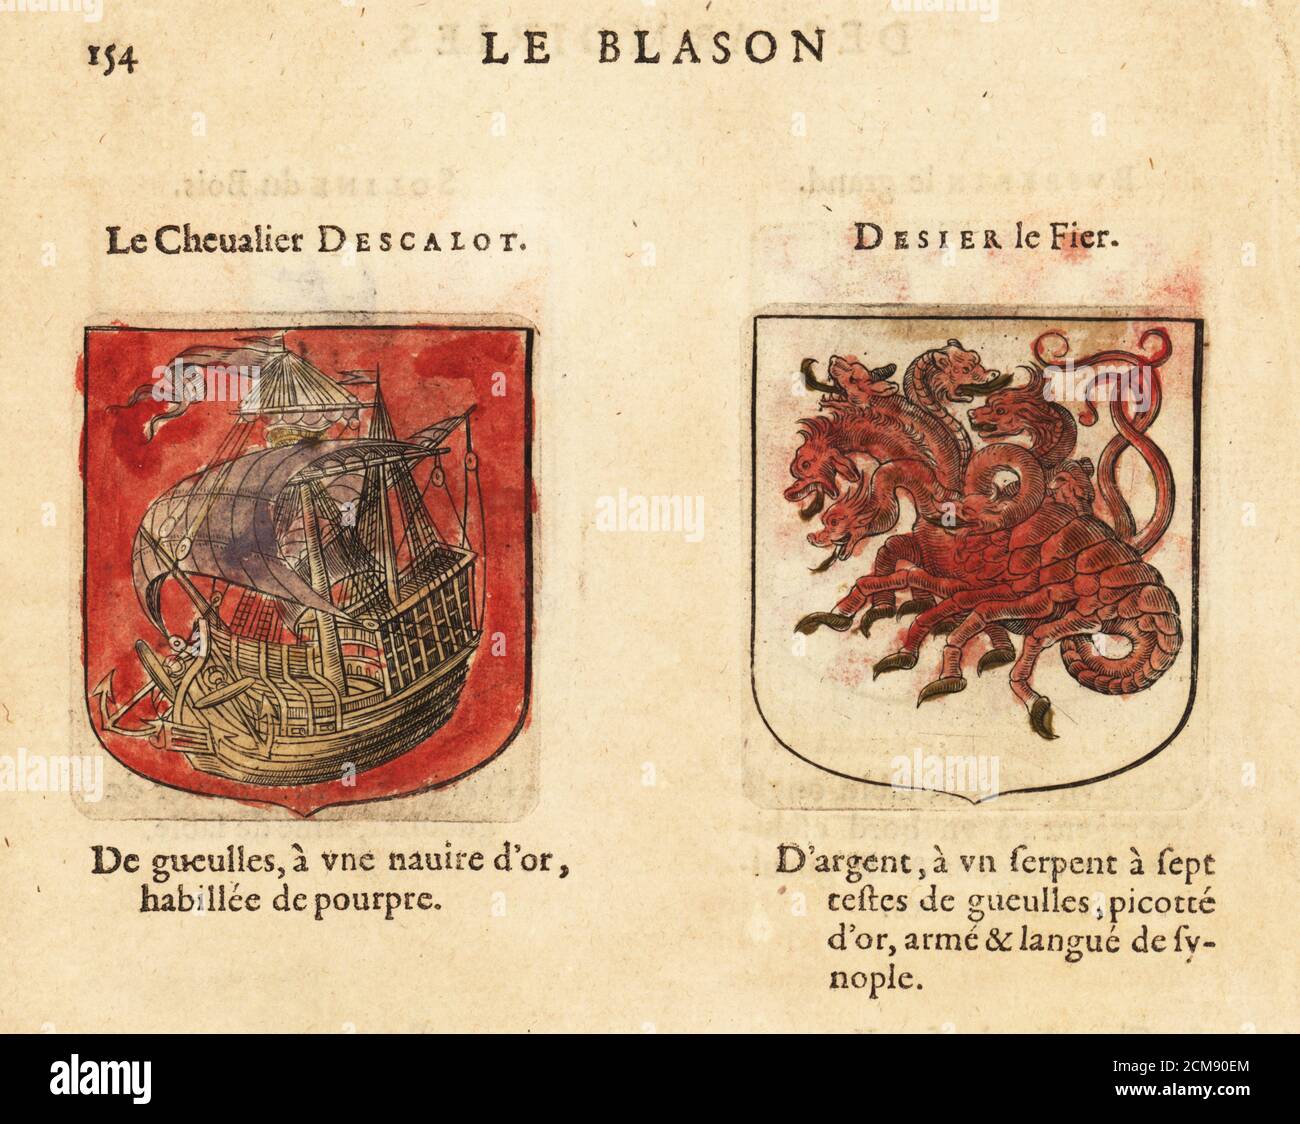 Coats of arms of the Eighth Chapter of King Arthur’s Knights of the Round Table: the Knight attired in Scarlet, with gold ship, Dezier the Fierce, with seven-headed serpent. Chevaliers de la table ronde: le Chevalier DESCALOT, DESIER le Fier. Handcoloured woodblock engraving from Hierosme de Bara’s Le Blason des Armoiries, Chez Rolet Boutonne, Paris, 1628 Stock Photo